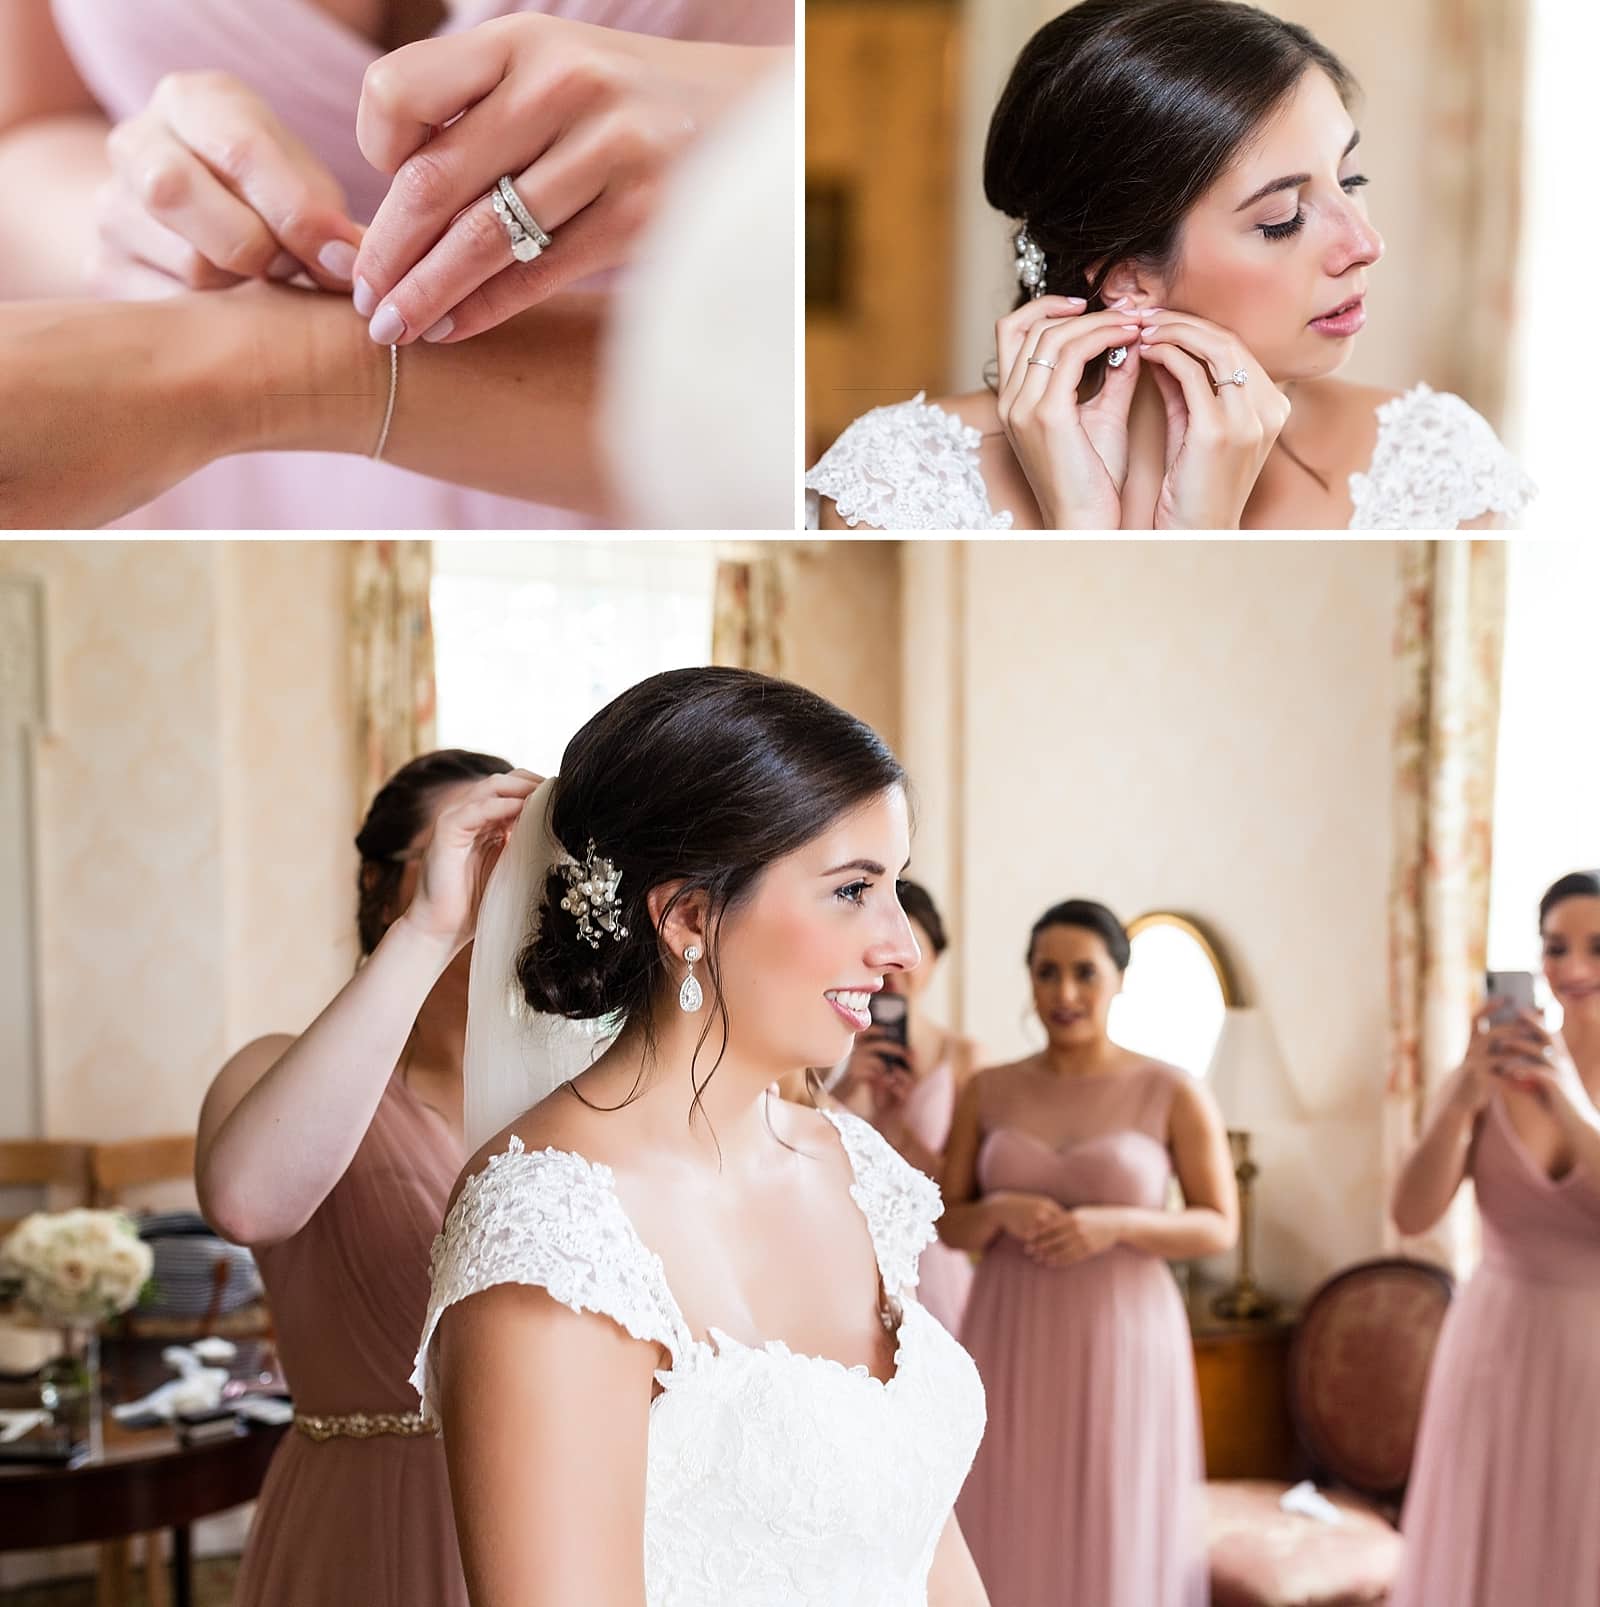 Bridal prep, bride getting ready, putting on earrings, bridesmaids, bridal jewelry and accessories 